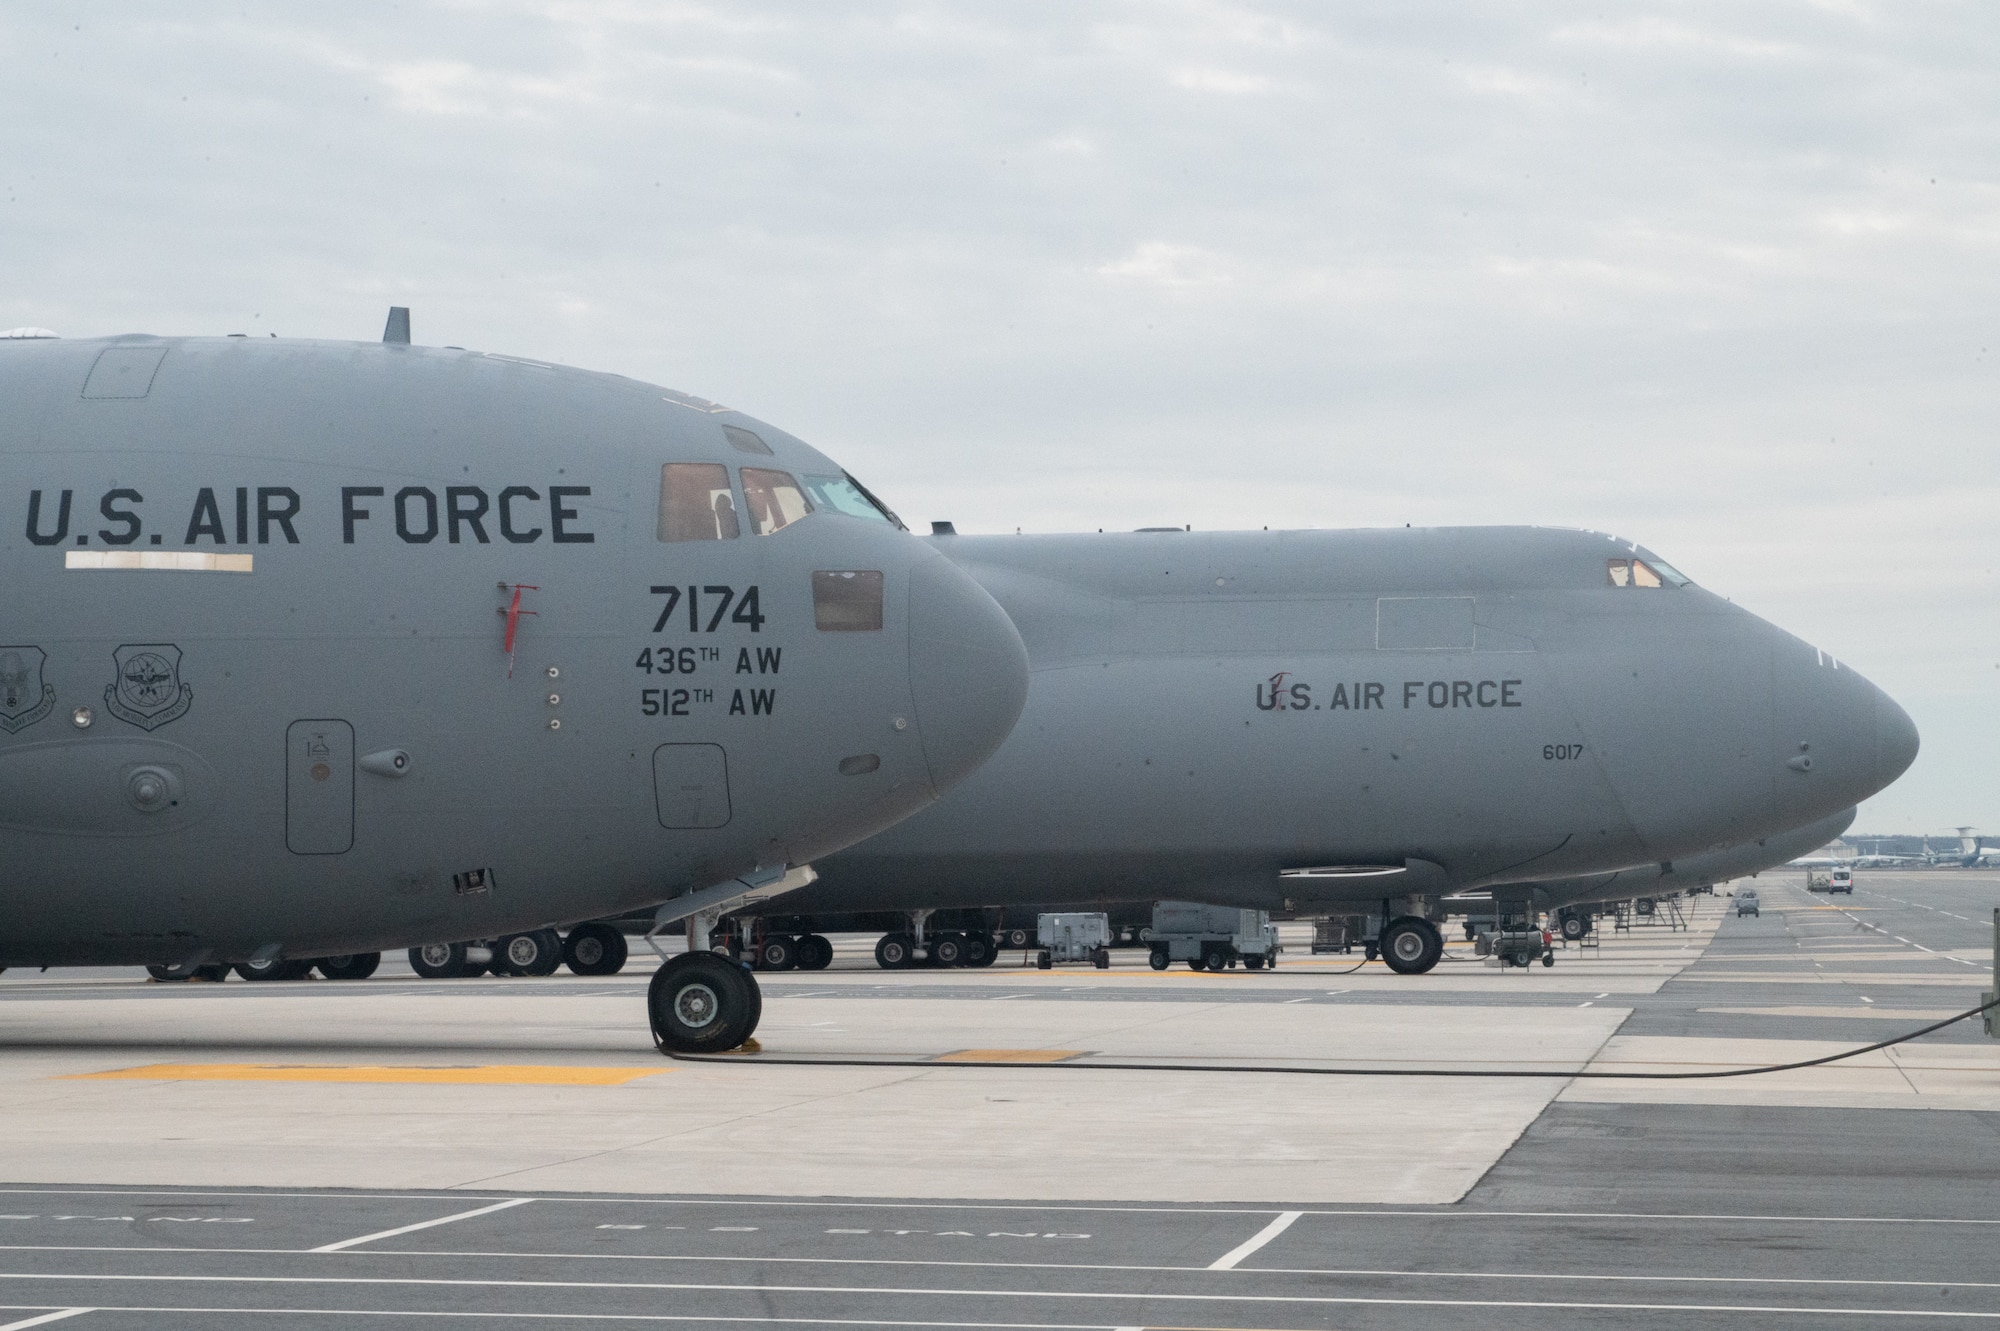 A C-17 Globemaster III and a C-5M Super Galaxy sit on the flightline at Dover Air Force Base, Delaware, Jan. 30, 2023. The Plans and Scheduling team oversees a total of 18 C-5M Super Galaxies and 13 C-17s at Dover AFB. (U.S. Air Force photo by Mauricio Campino)